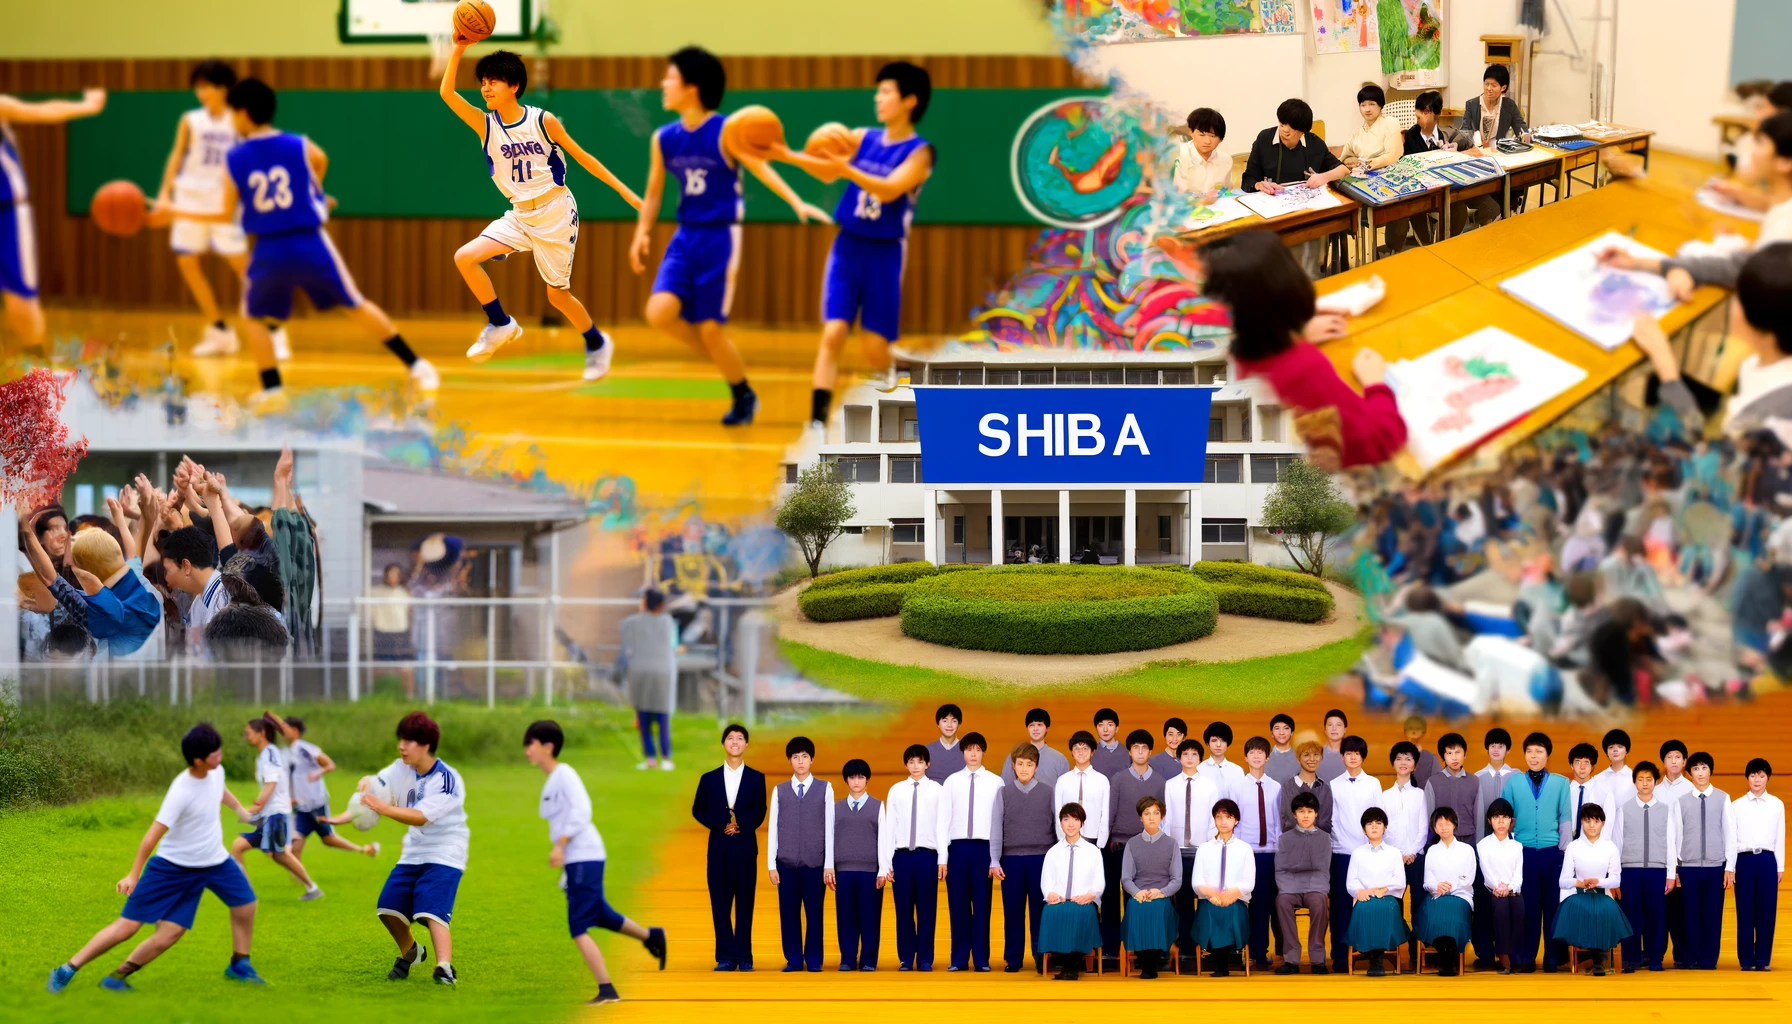 A dynamic extracurricular scene at SHIBA middle school with students participating in various club activities. The image features sports like basketball and soccer, along with artistic clubs such as painting and music, all happening in a large, well-equipped school yard. The students are energetic and engaged, with the school's name 'SHIBA' displayed on banners and uniforms, highlighting the school's vibrant club culture.